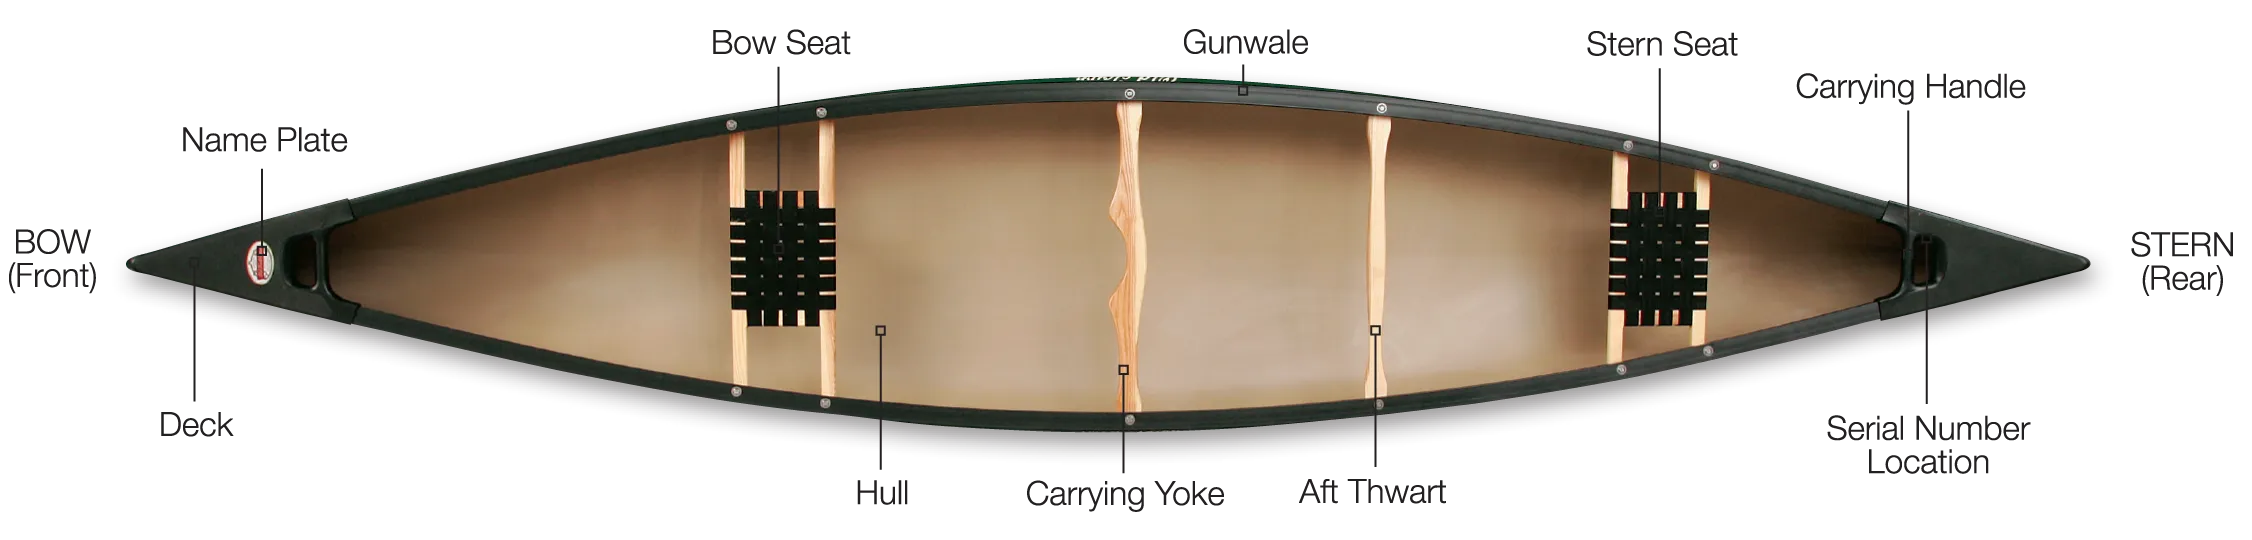 structure of a canoe